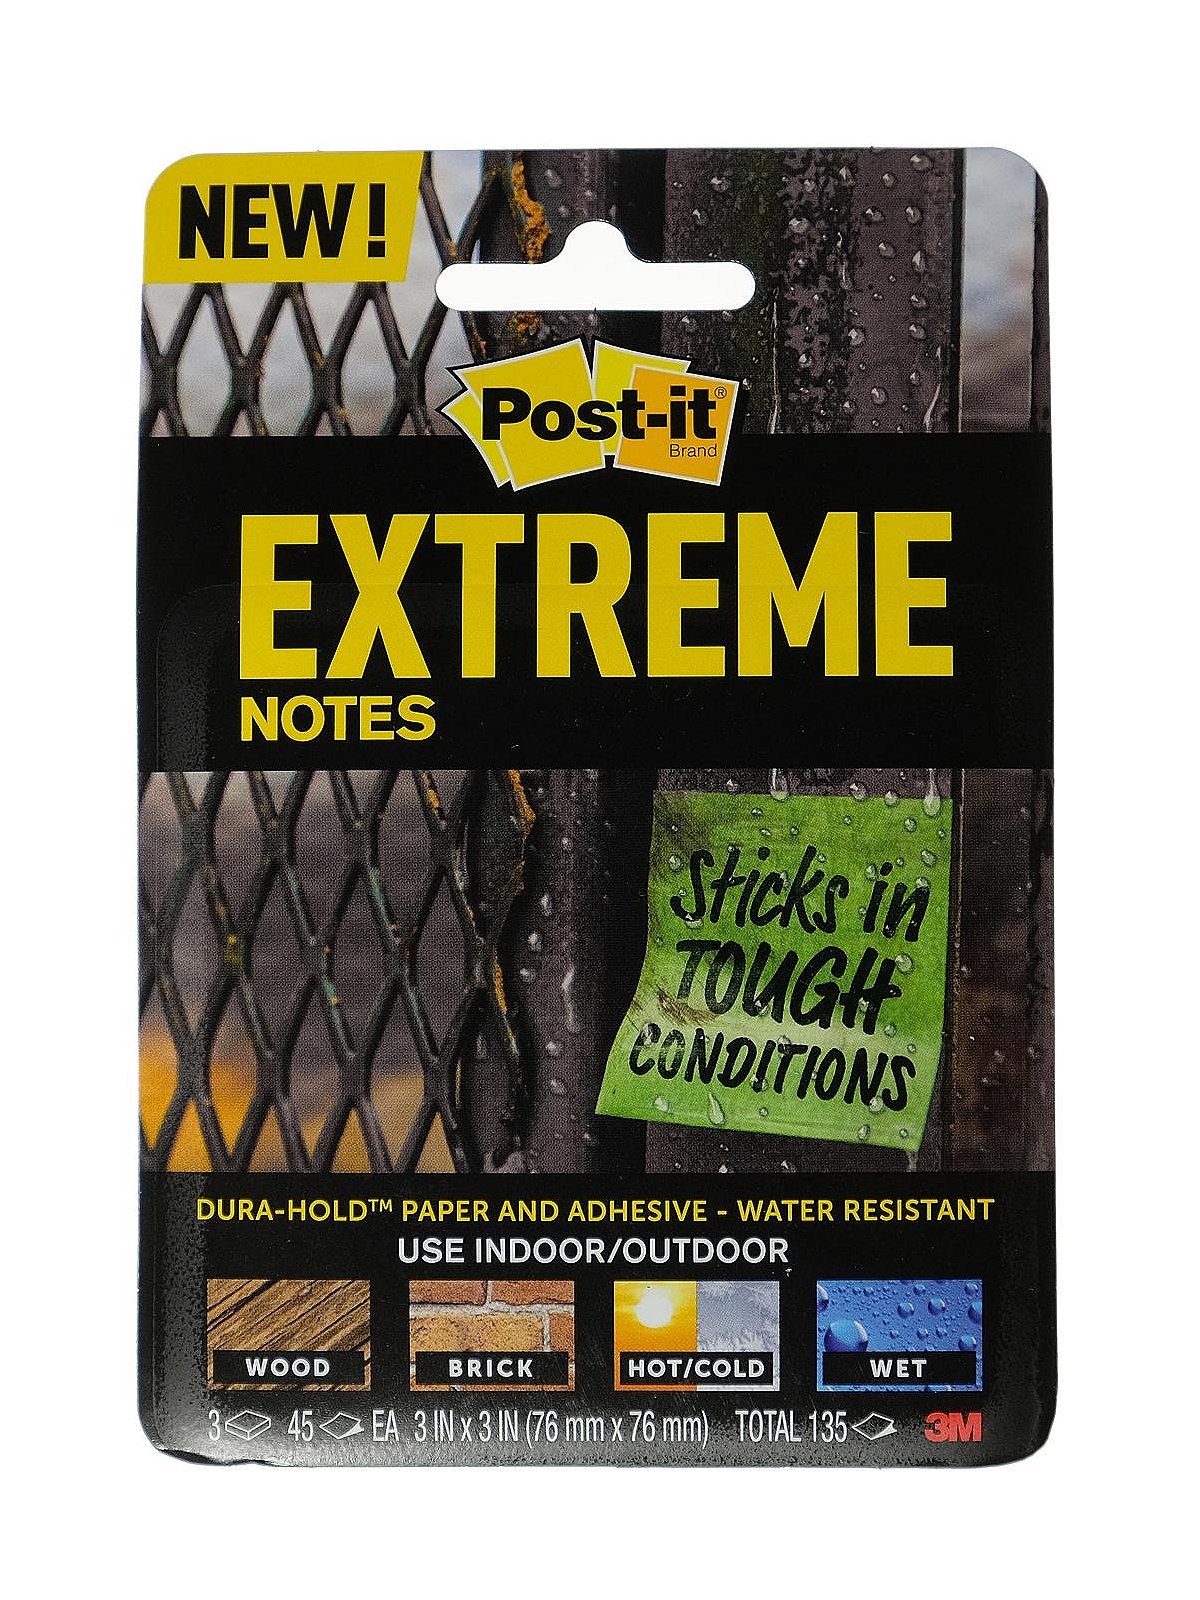 Post-It Extreme Notes Stay Stuck Even in Hot, Cold and Wet Conditions